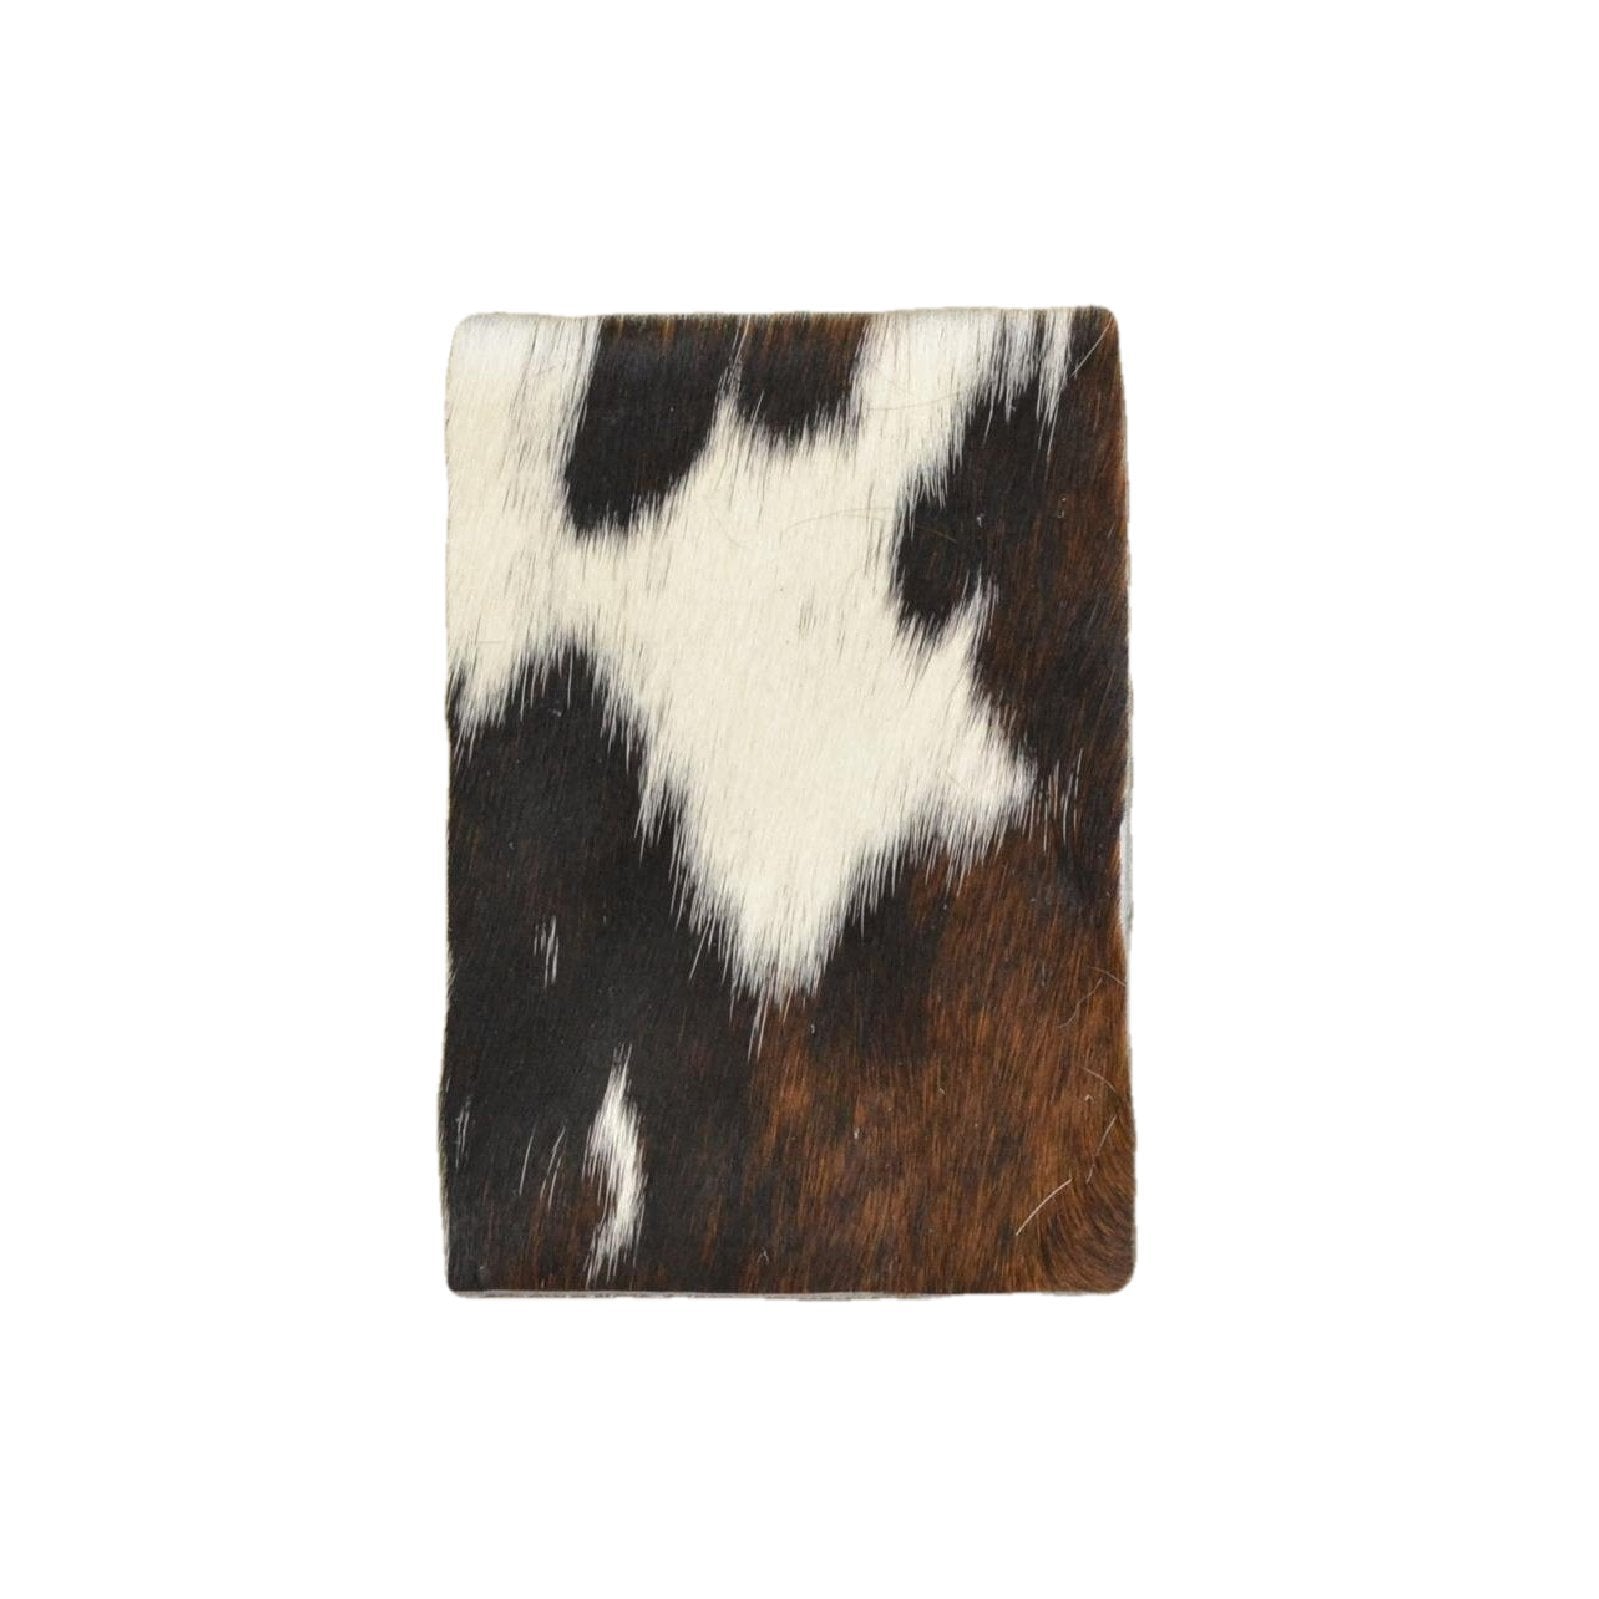 Tri-Colored Black/Brown/Off White Hair on Cow Hide Pre-cut, 4 x 6 | The Leather Guy